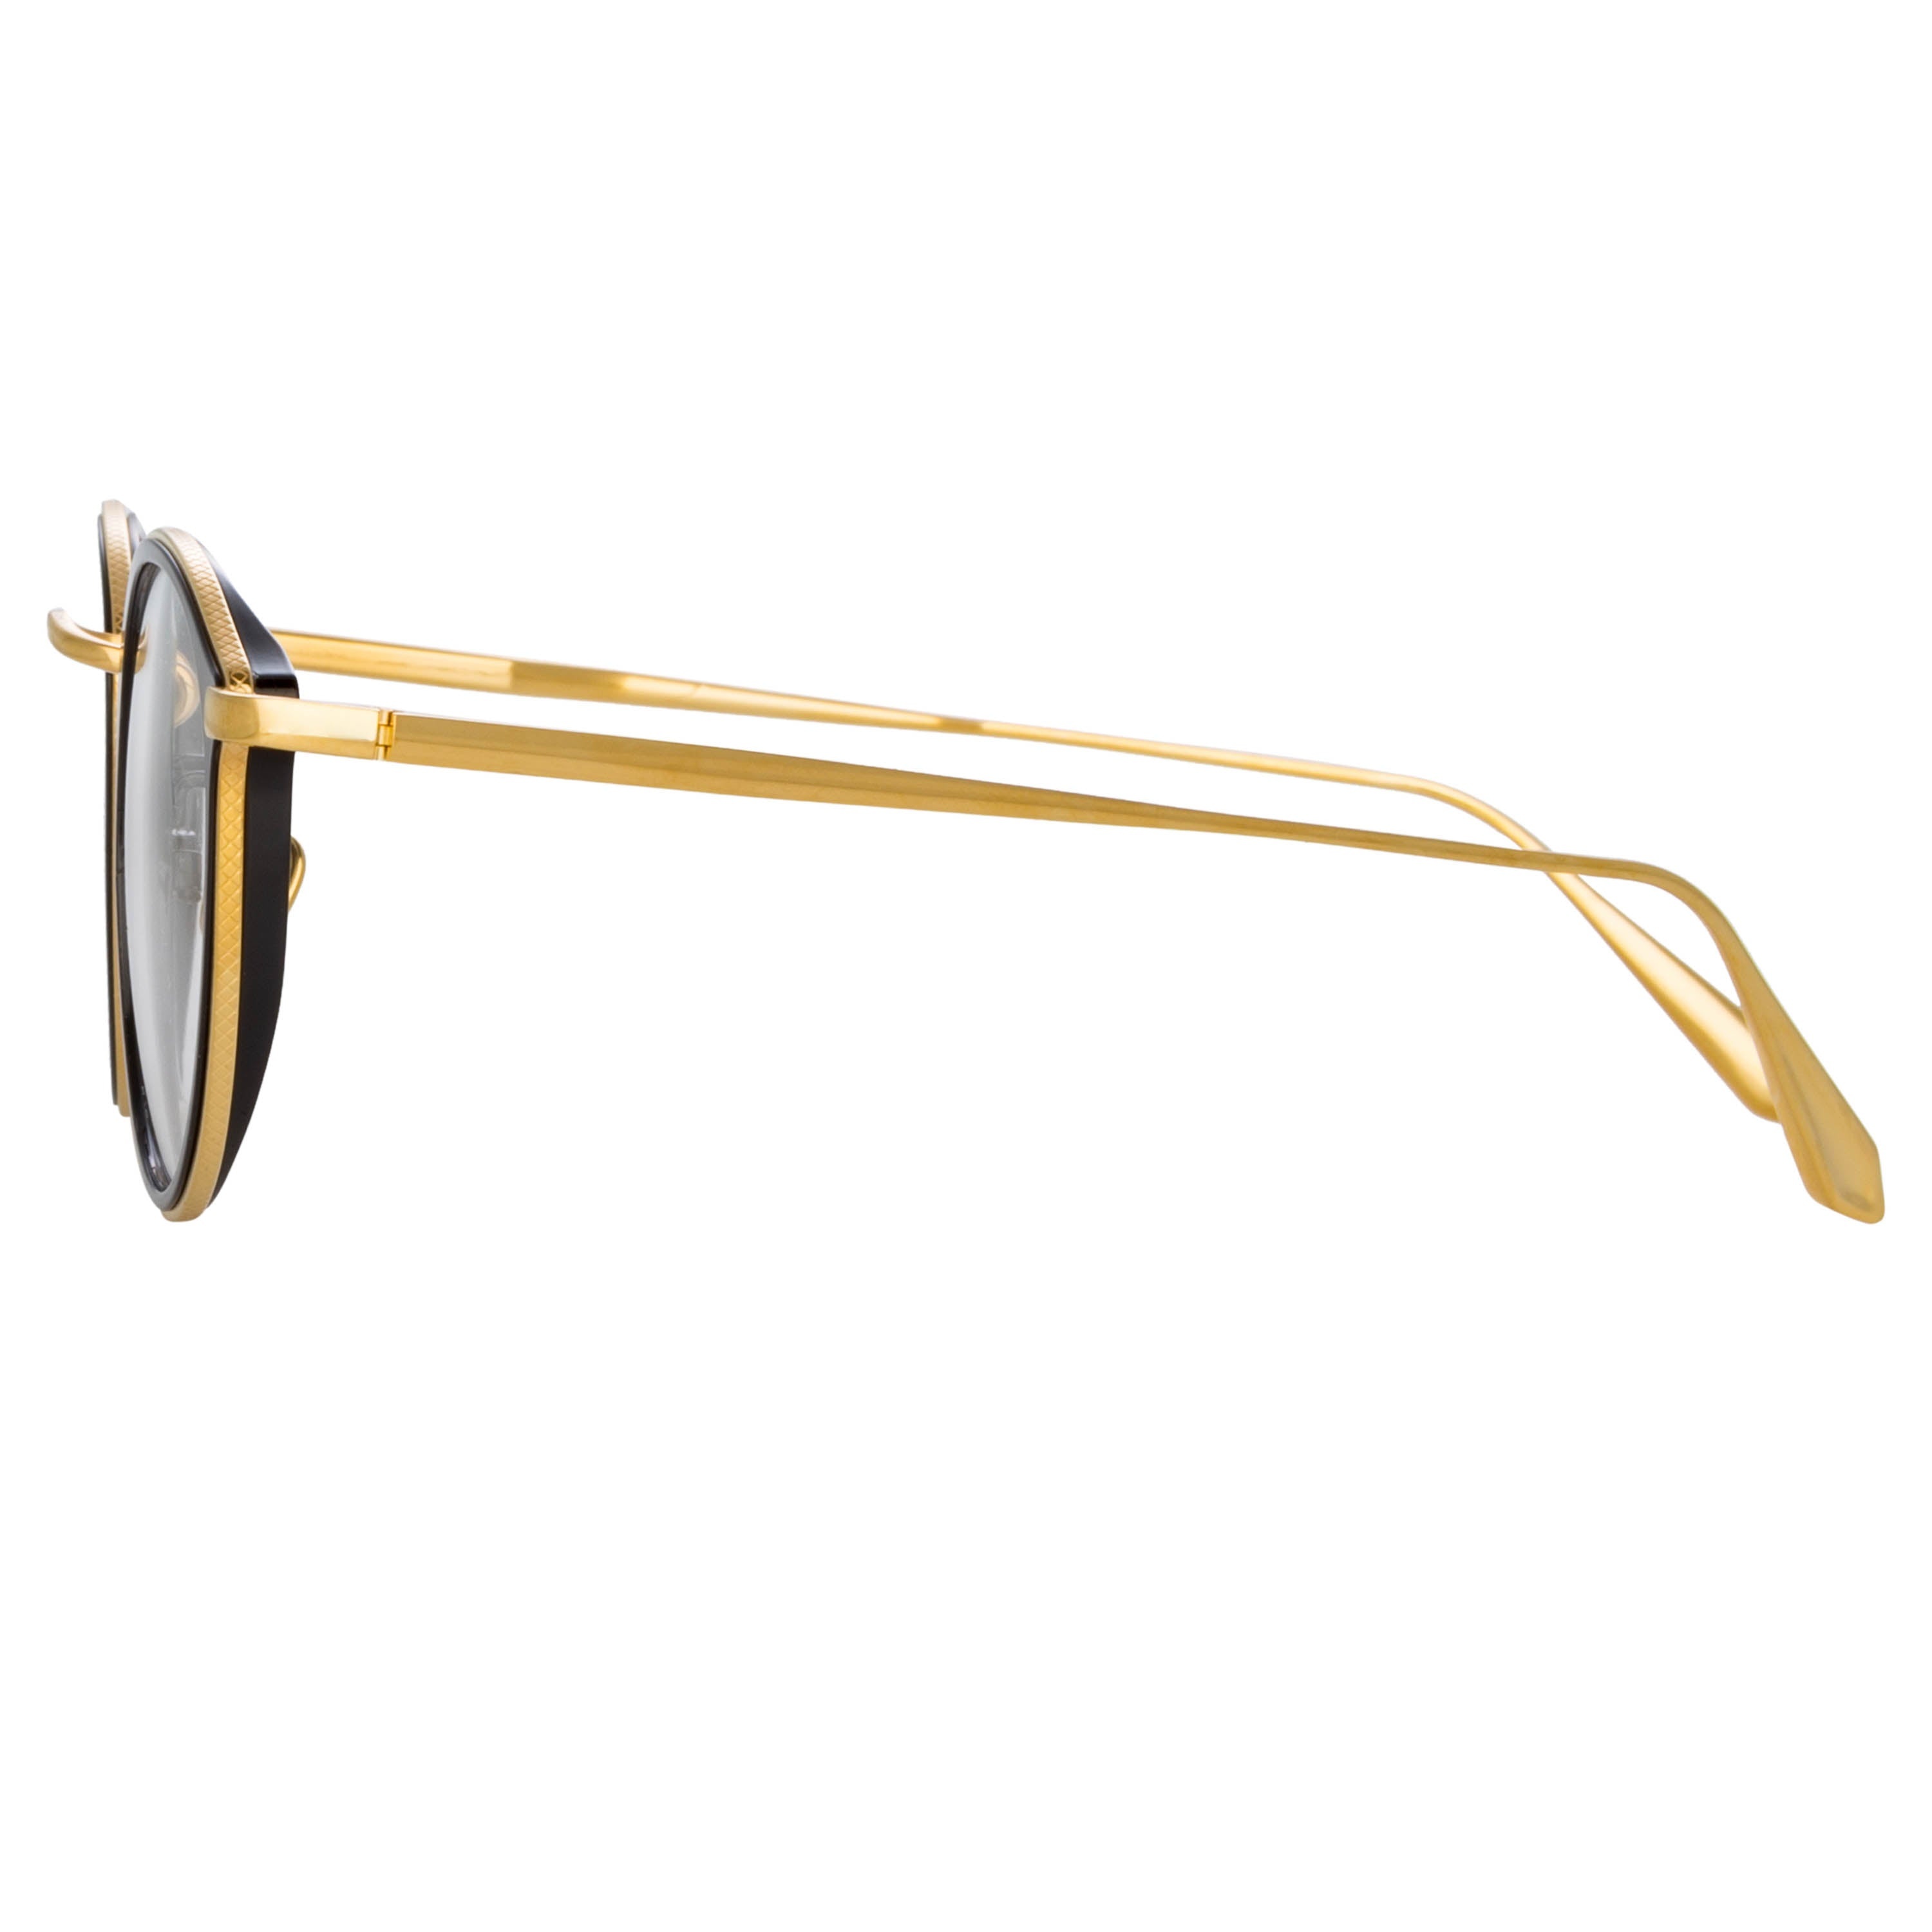 LUIS OVAL OPTICAL FRAME IN YELLOW GOLD AND BLACK - 5